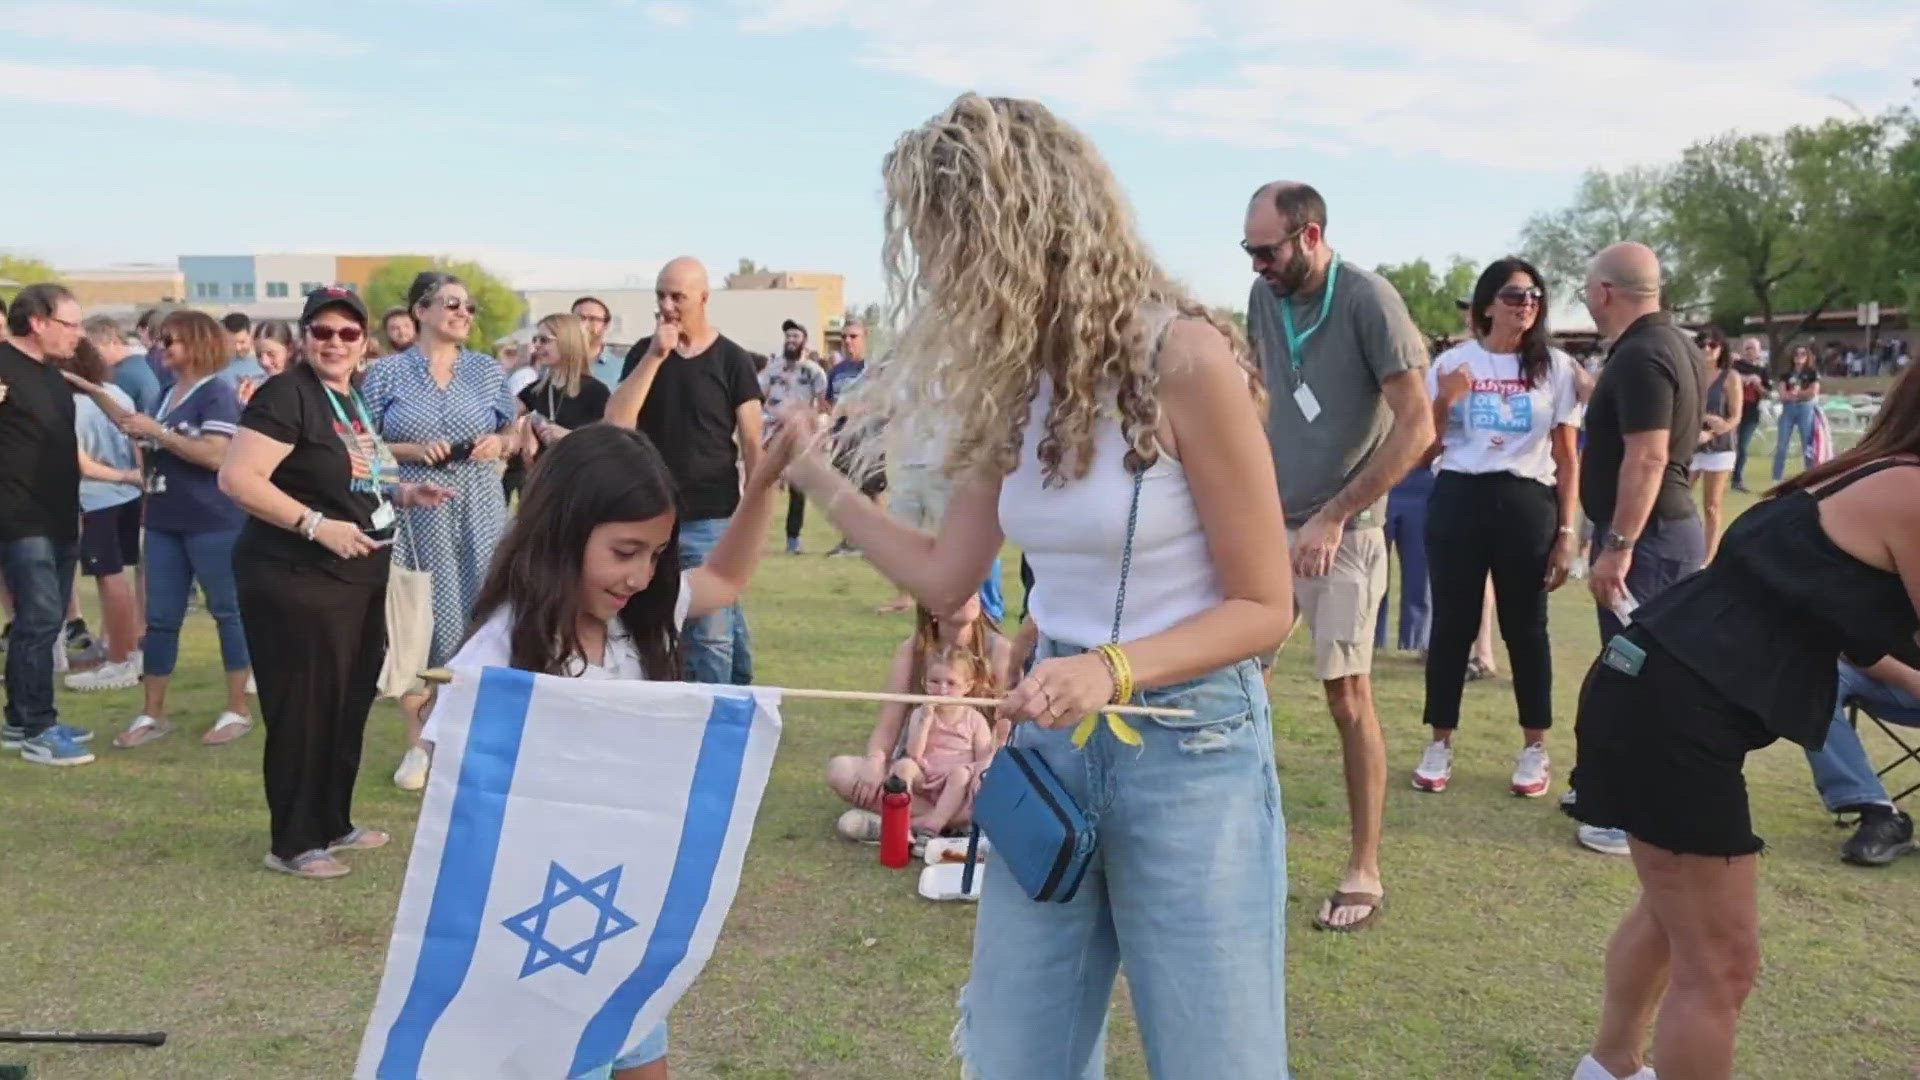 Wednesday marked the celebration of Israel Independence Day.